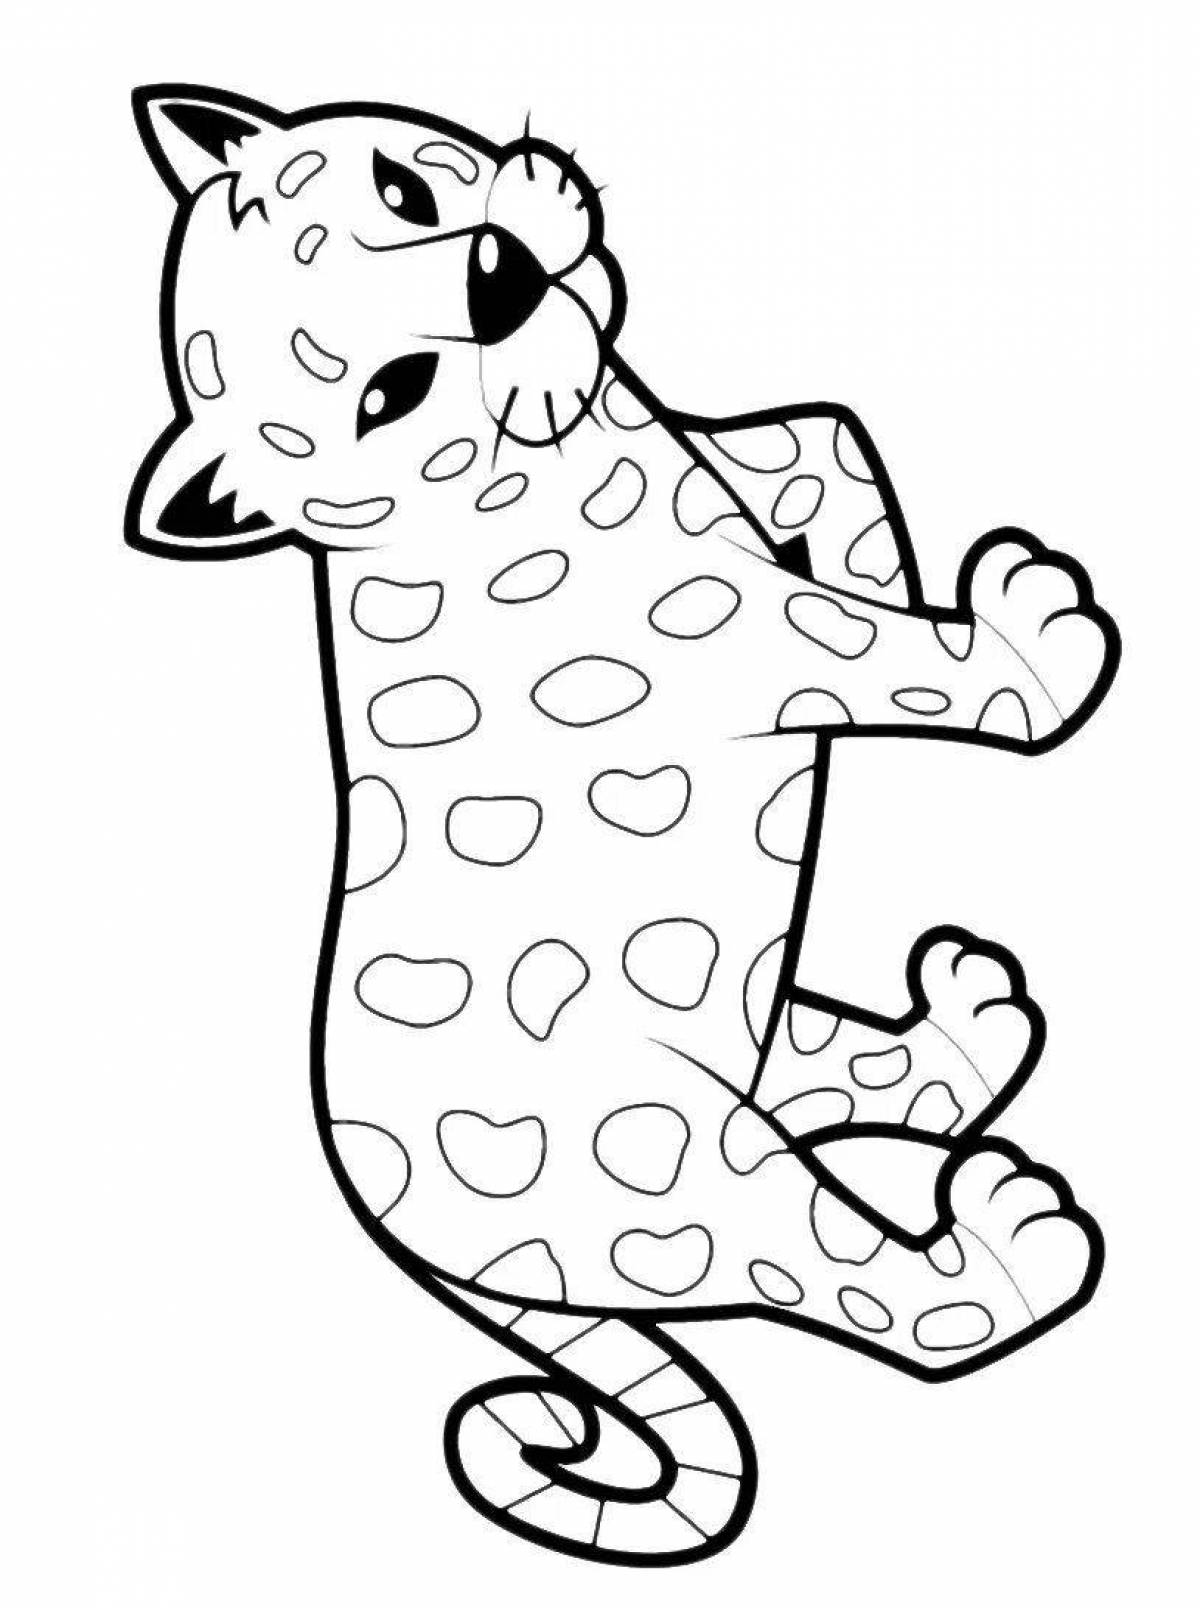 Coloring page dazzling leopard